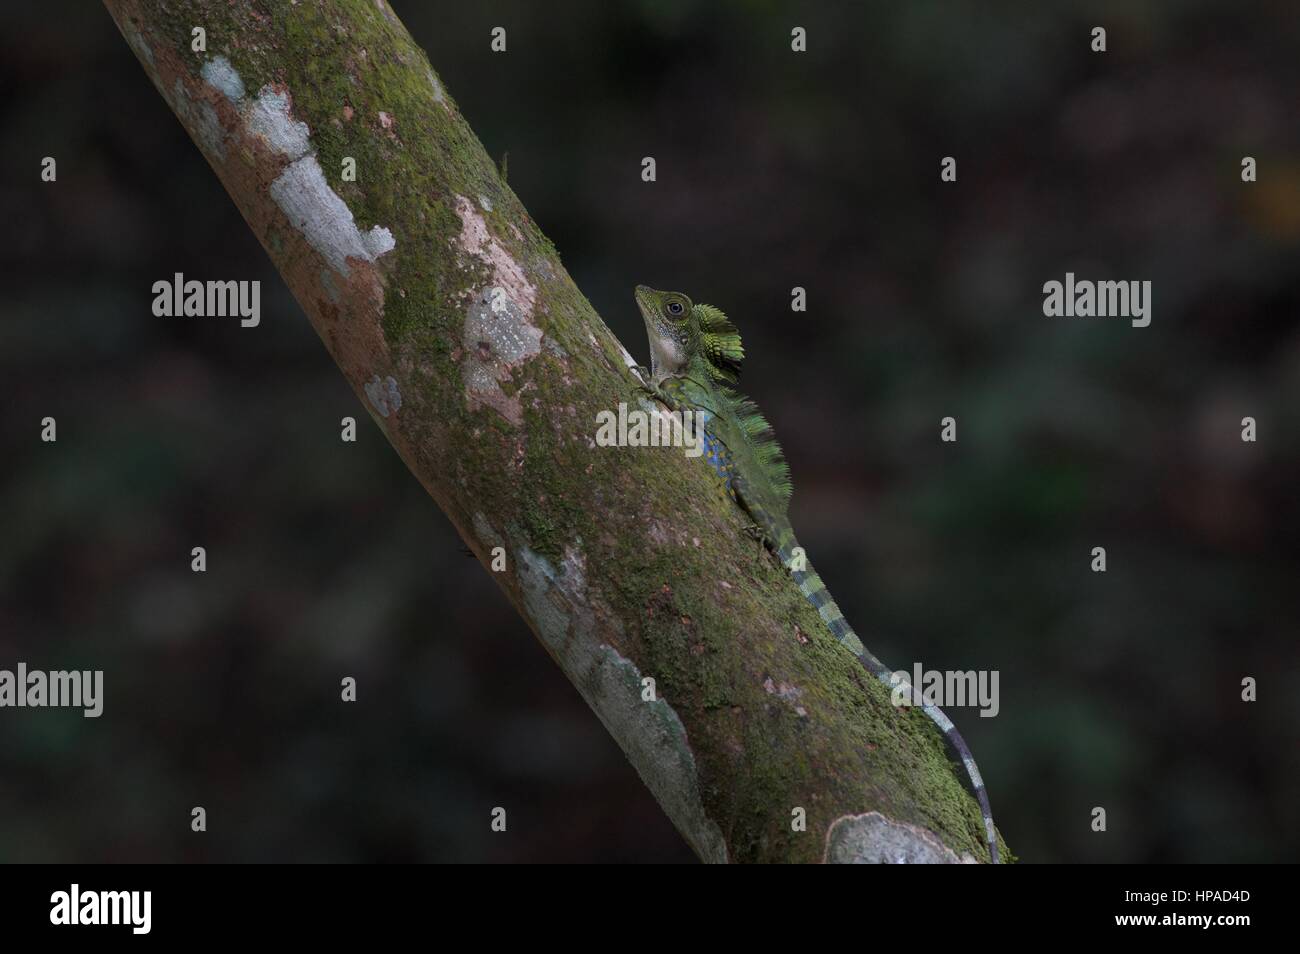 An adult male Great Anglehead Lizard (Gonocephalus grandis) on a tree in the Malaysian rainforest Stock Photo